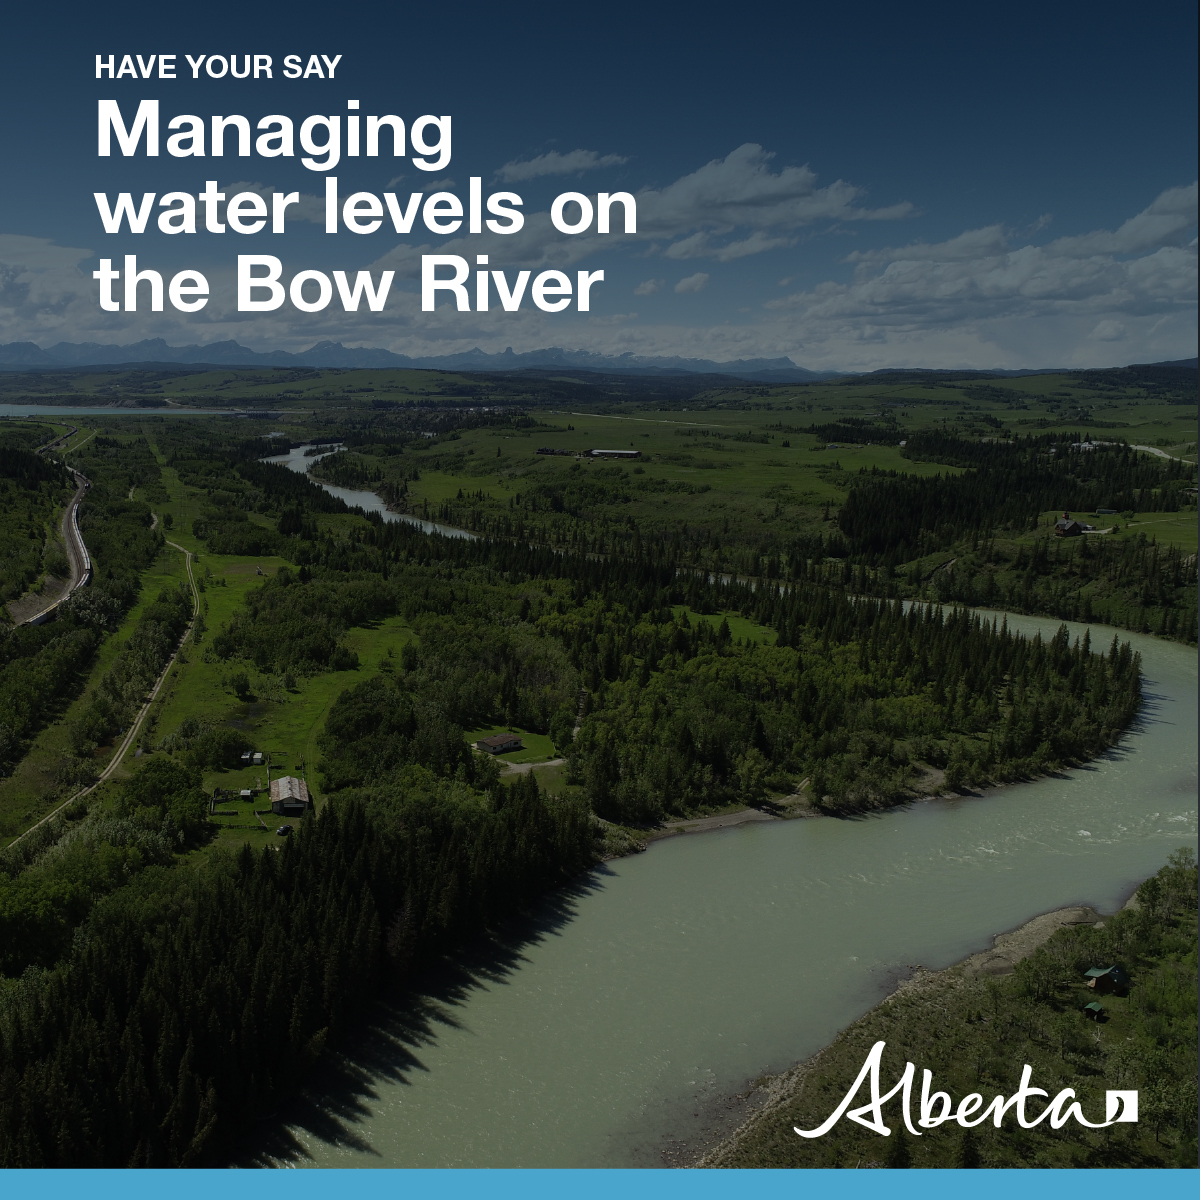 The Bow River is one the largest rivers in the province and managing water levels is important to help us plan for floods and droughts. We’re asking Albertans for feedback on how to proceed with future response planning. Survey closes May 6: alberta.ca/release.cfm?xI…